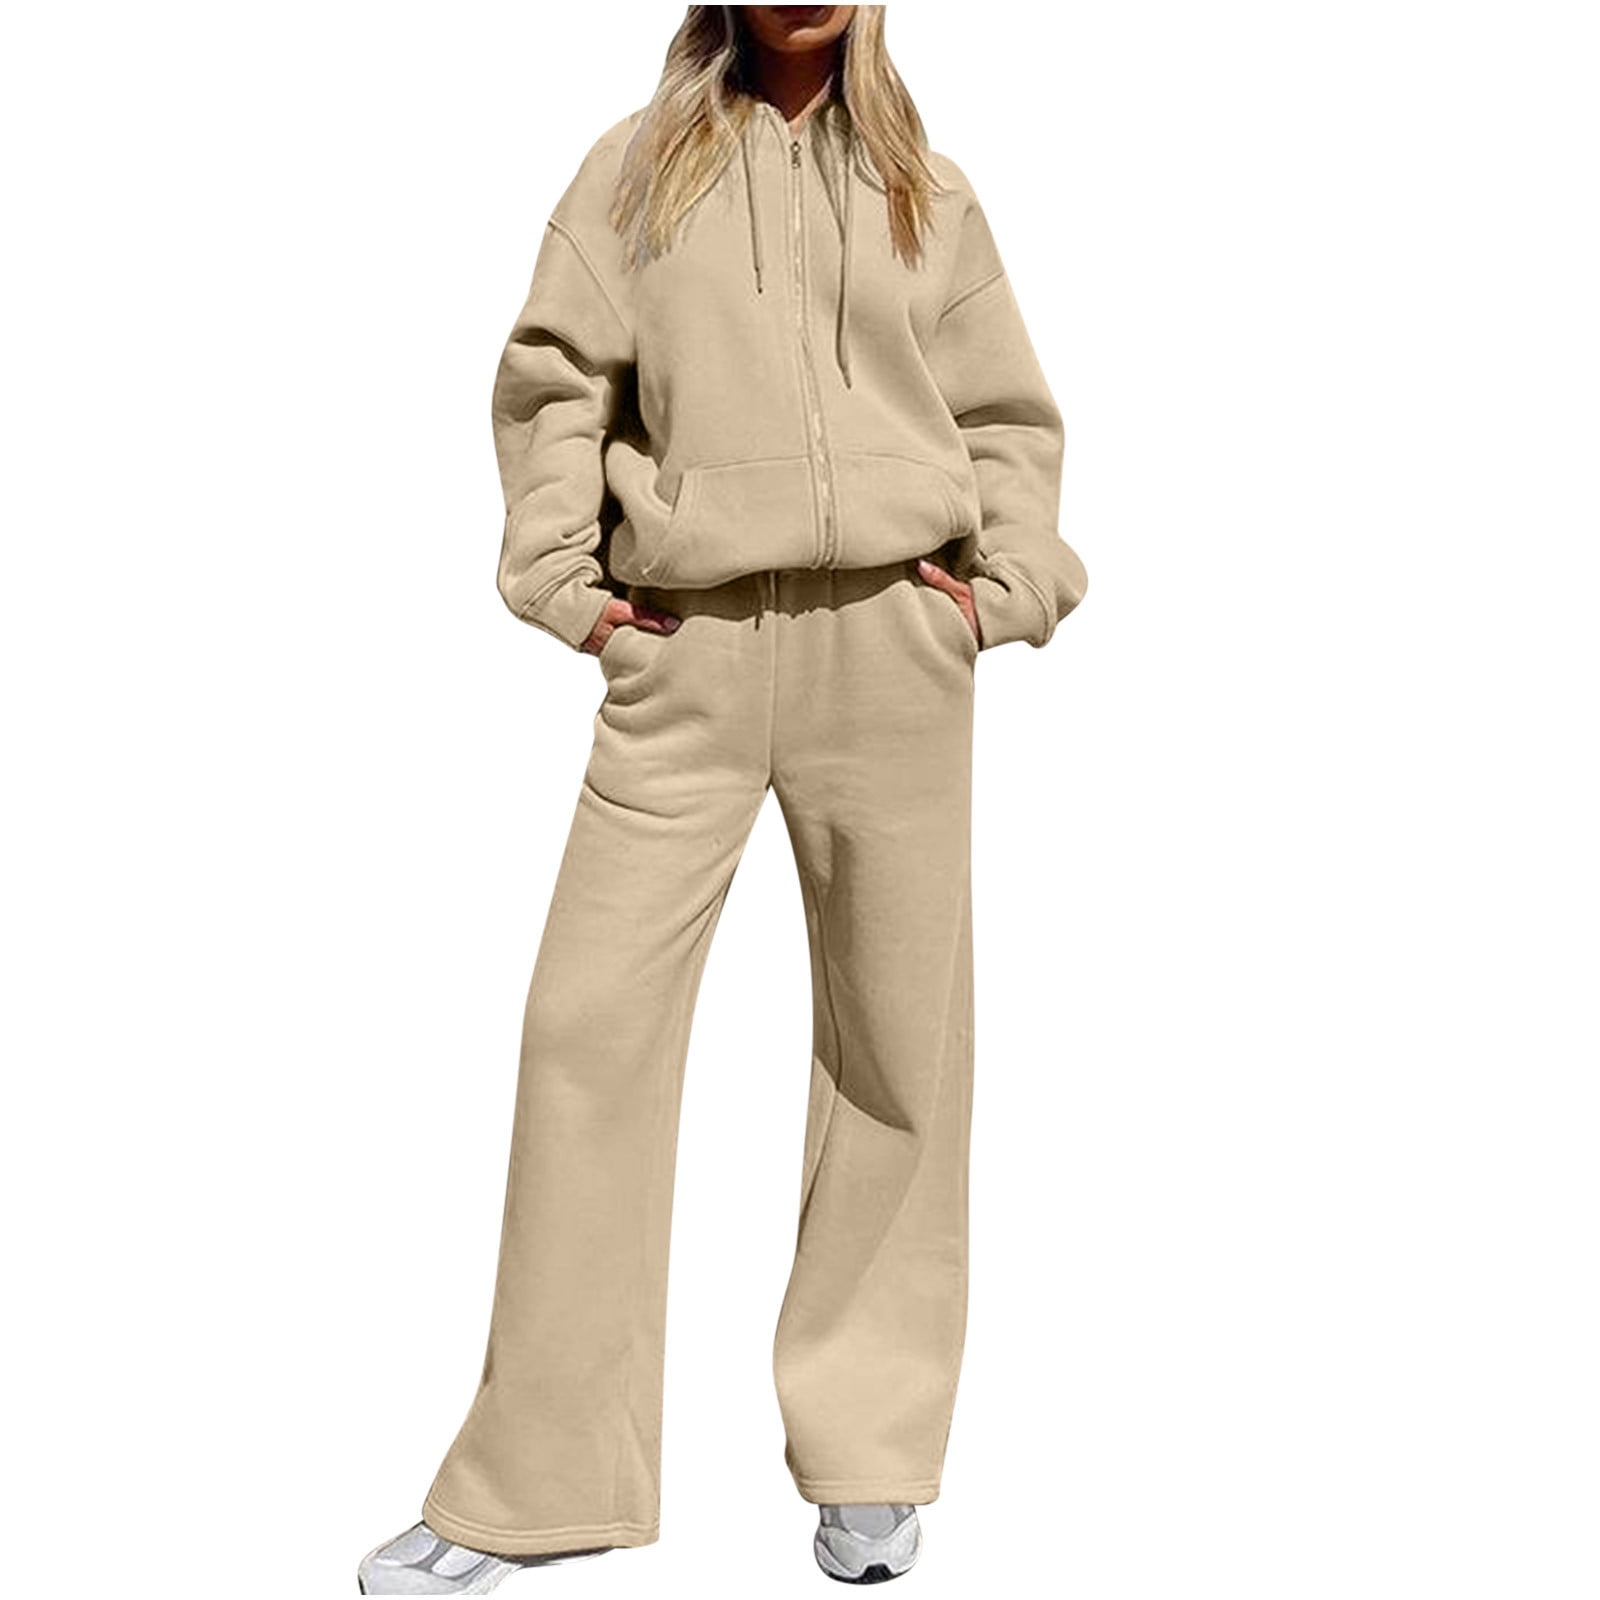 Winter Three Piece Set Womens Outfit Tracksuit Zip Hoodies+ High